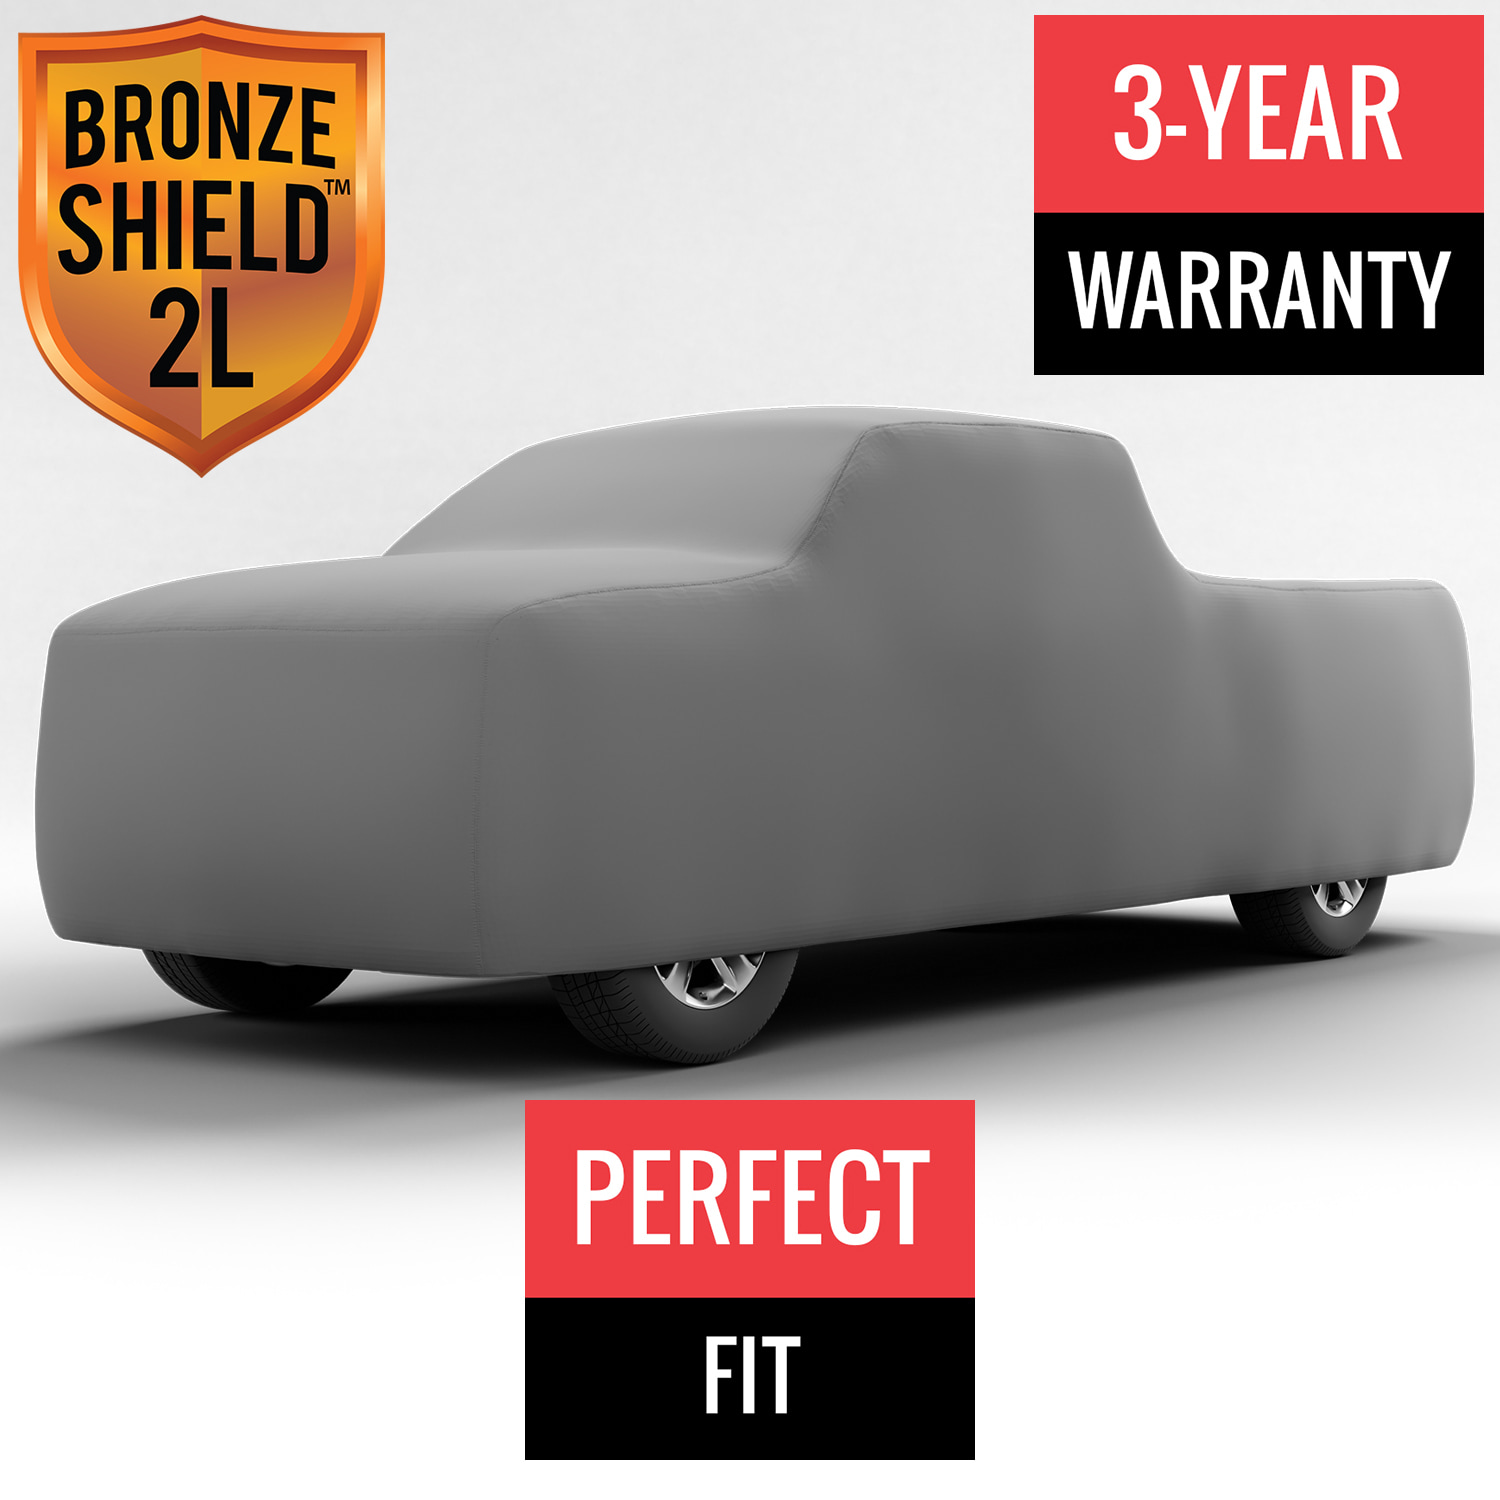 Bronze Shield 2L - Car Cover for GMC K15 Pickup 1968 Extended Cab Pickup 6.5 Feet Bed